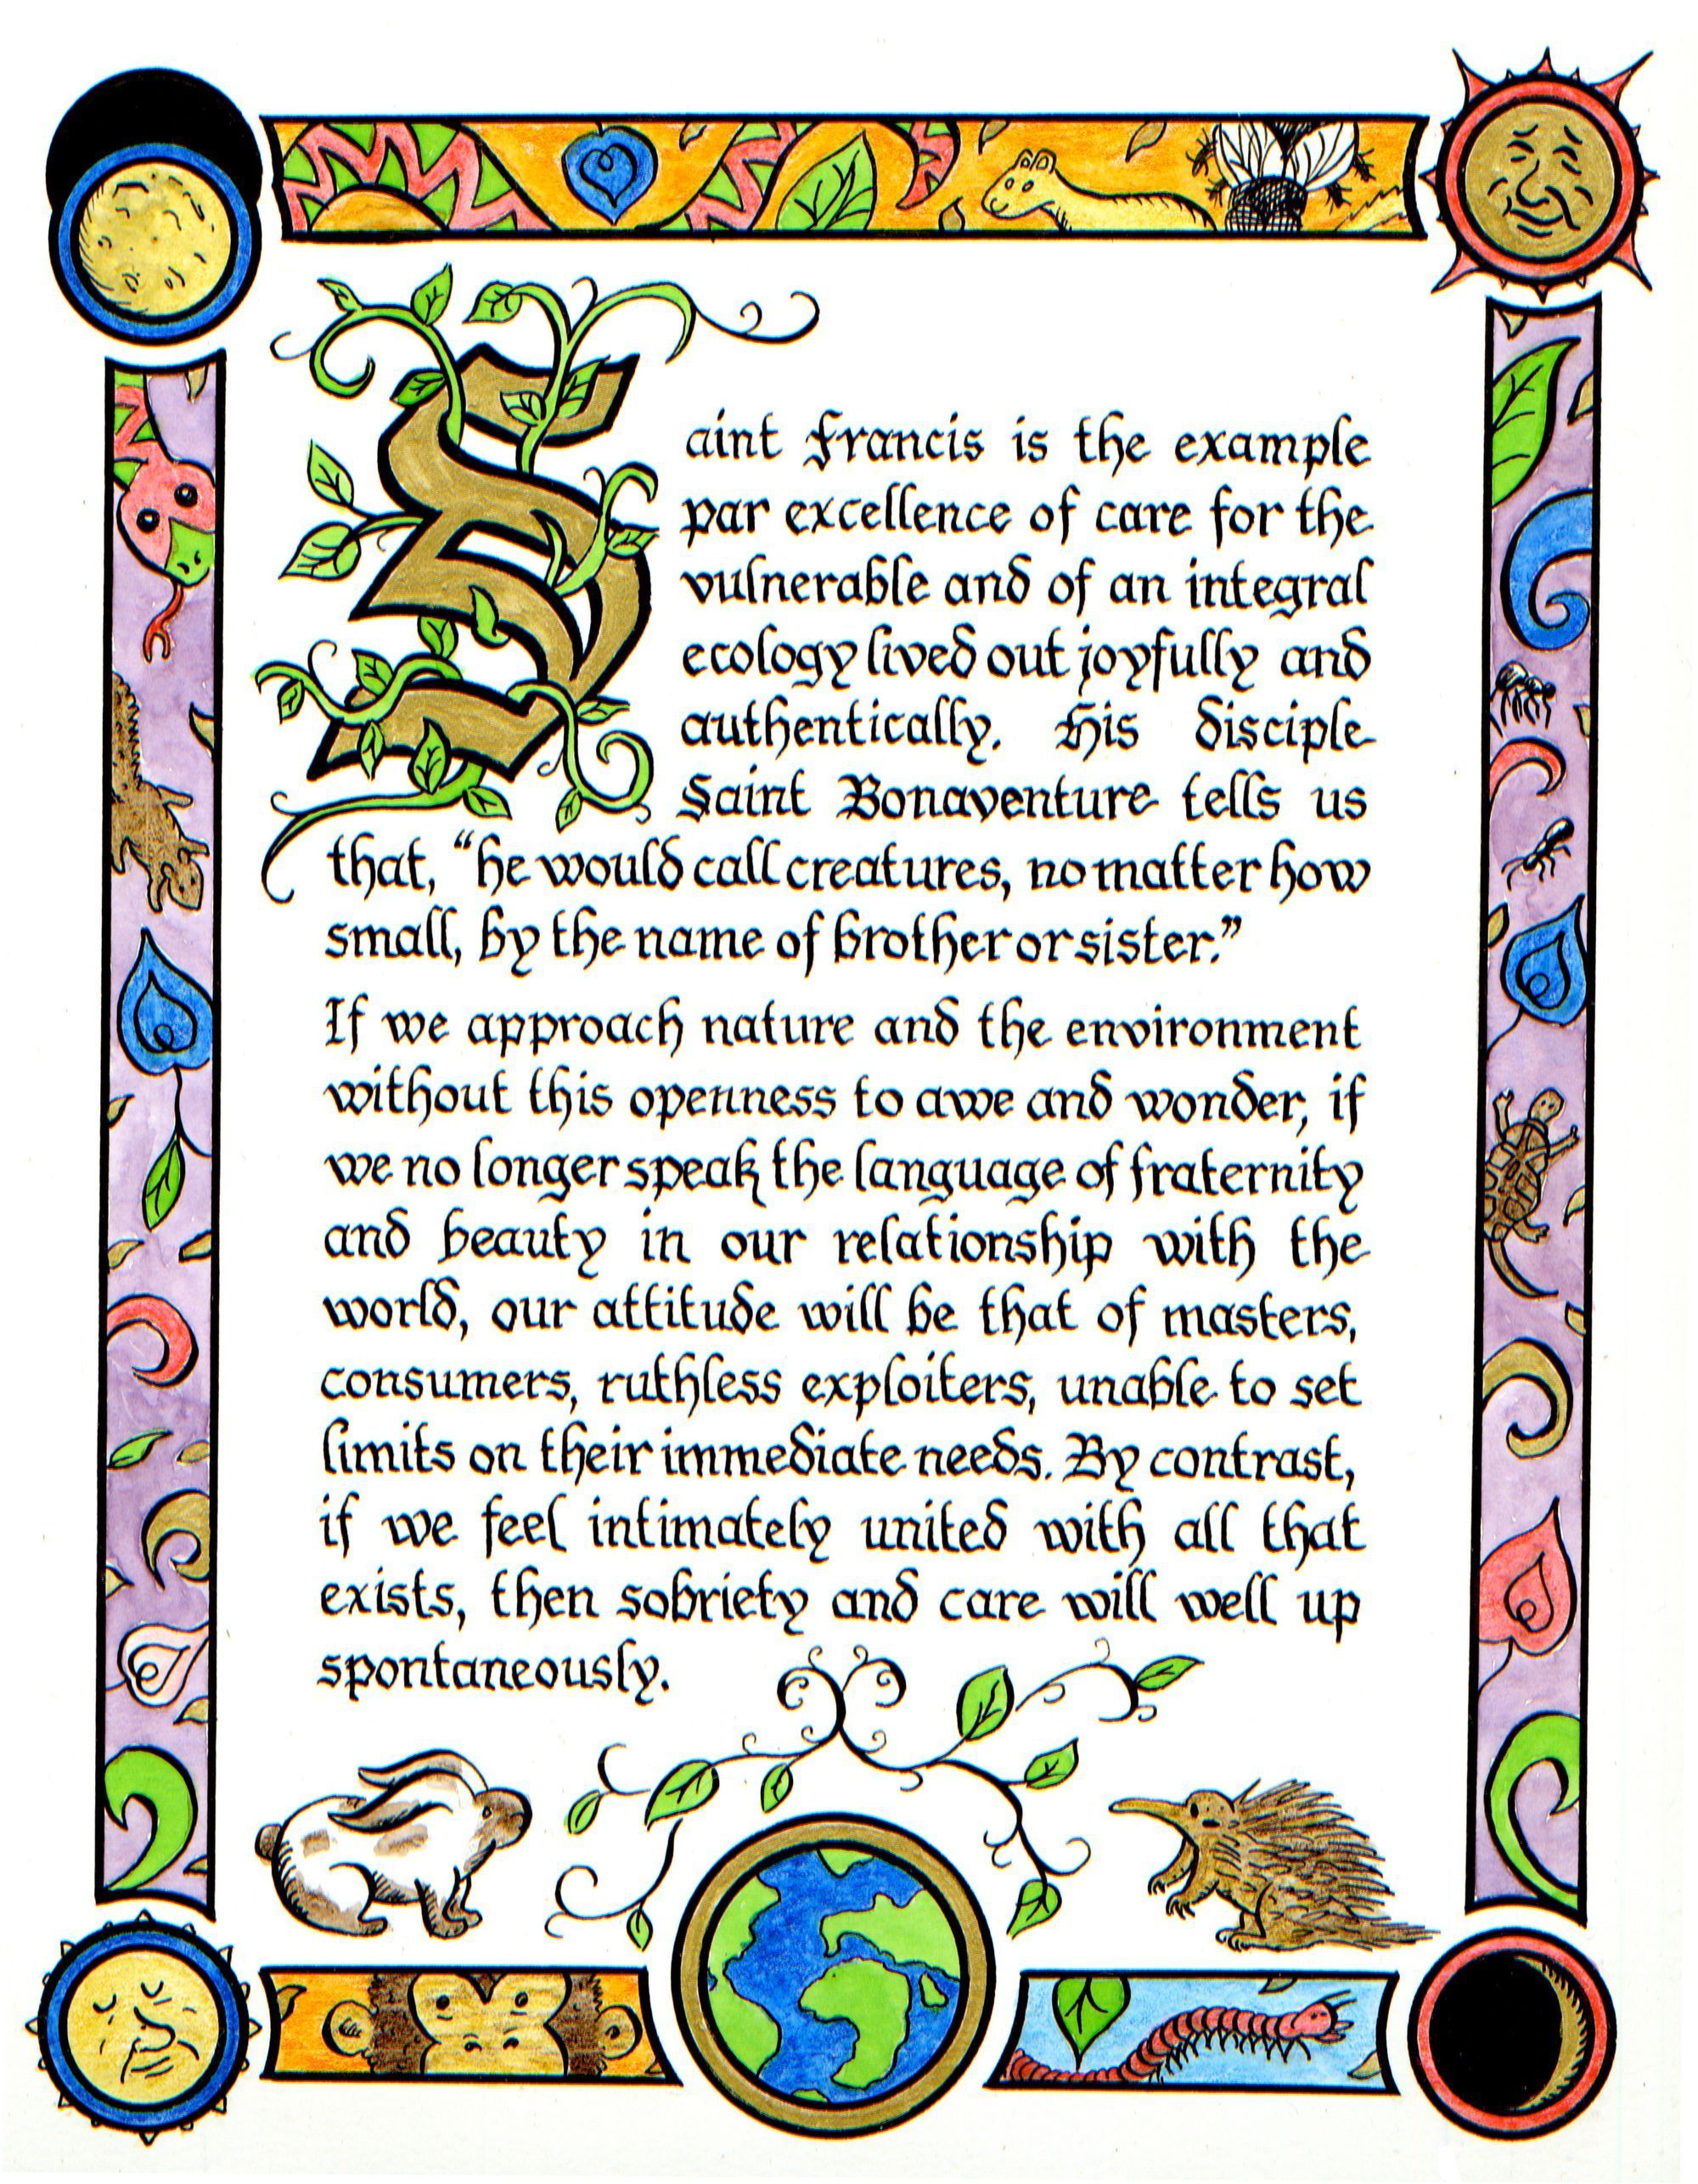 Illuminated manuscript, depicting an excerpt from the "Laudato Si" encyclical, Pope Francis's call to environmental action